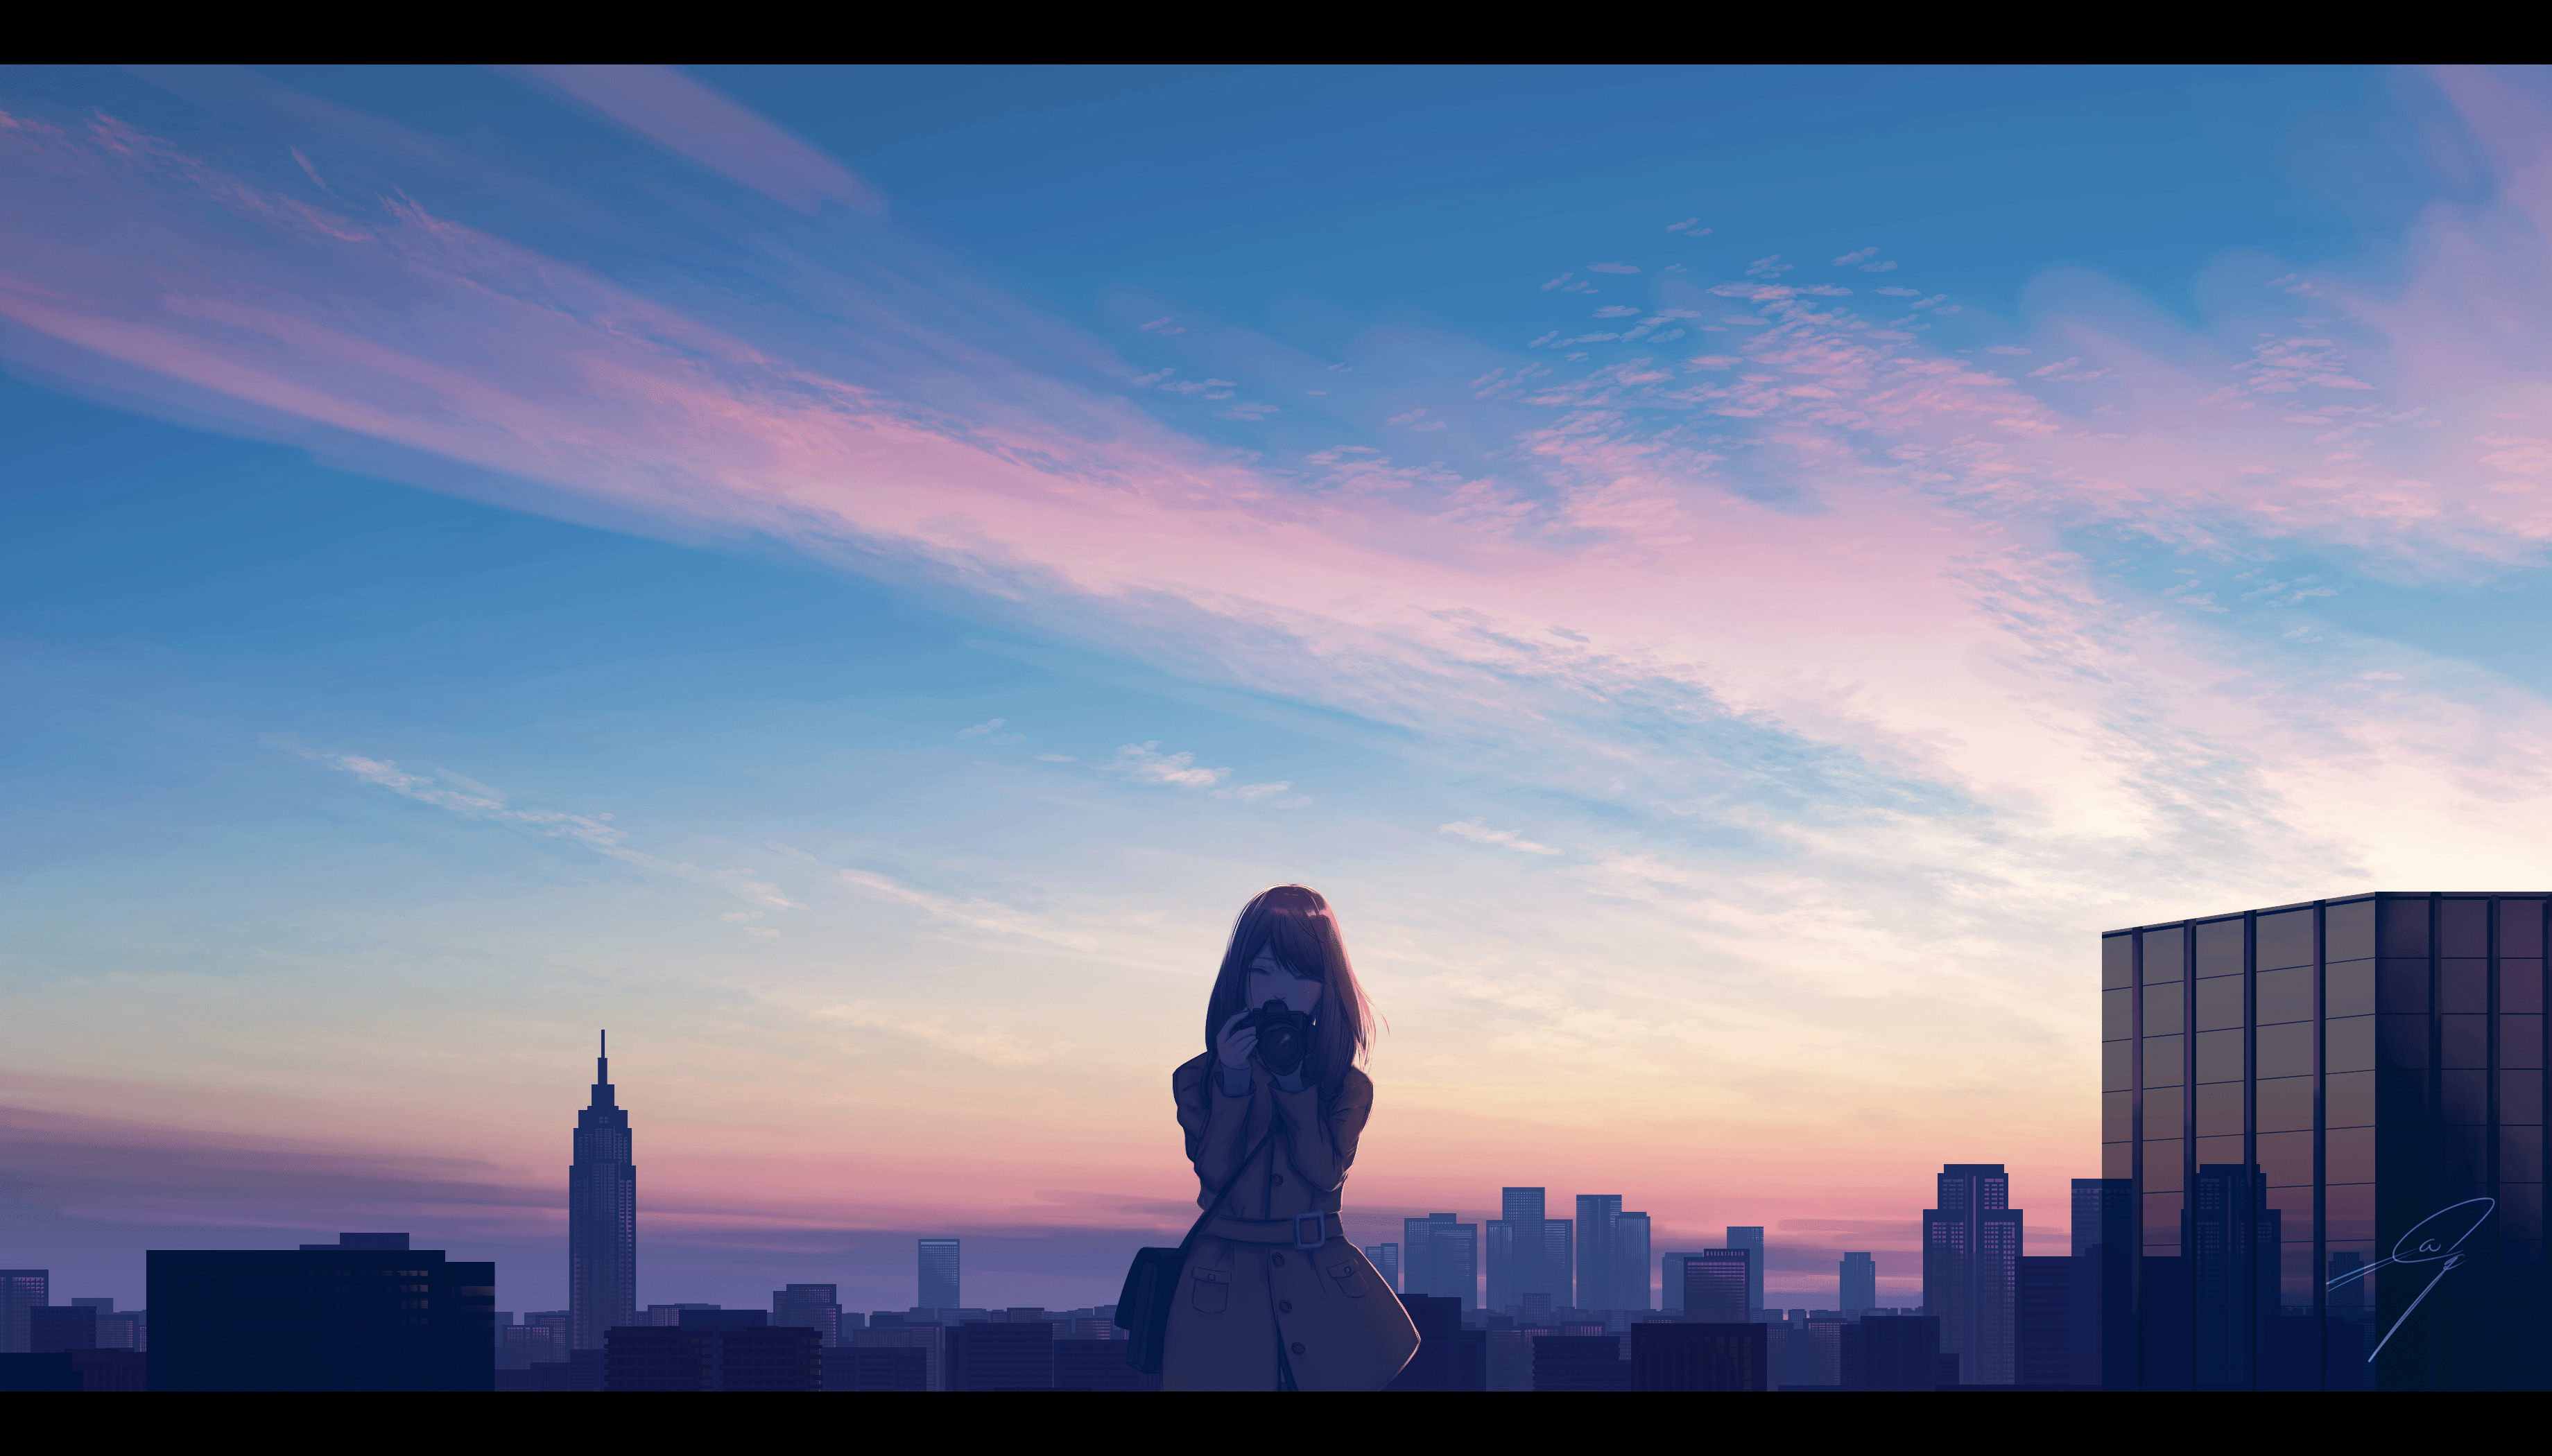 A woman standing on a rooftop looking out at the city - Anime city